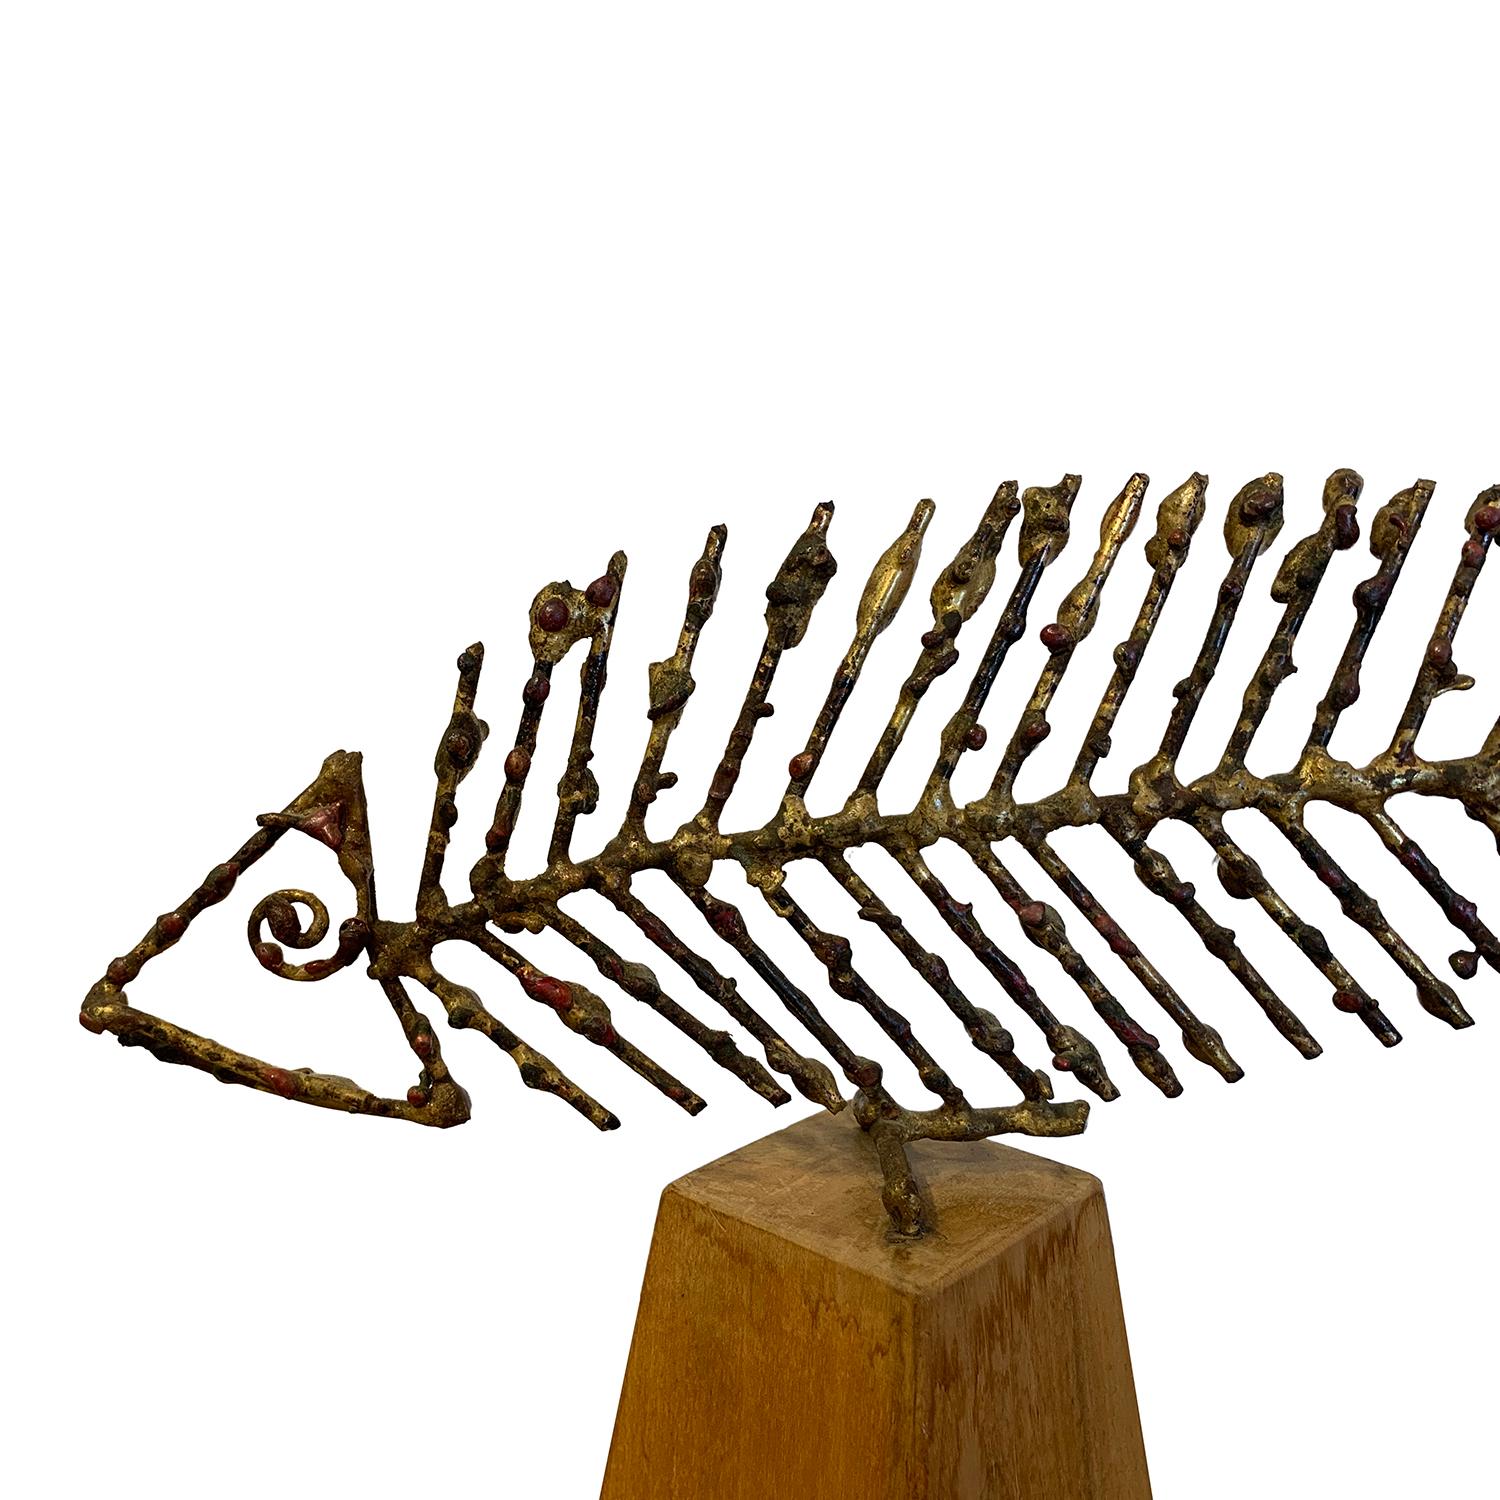 Hand-Carved 20th Century Italian Metal Sculpture, Fish on a Wood Base by Marcello Fantoni